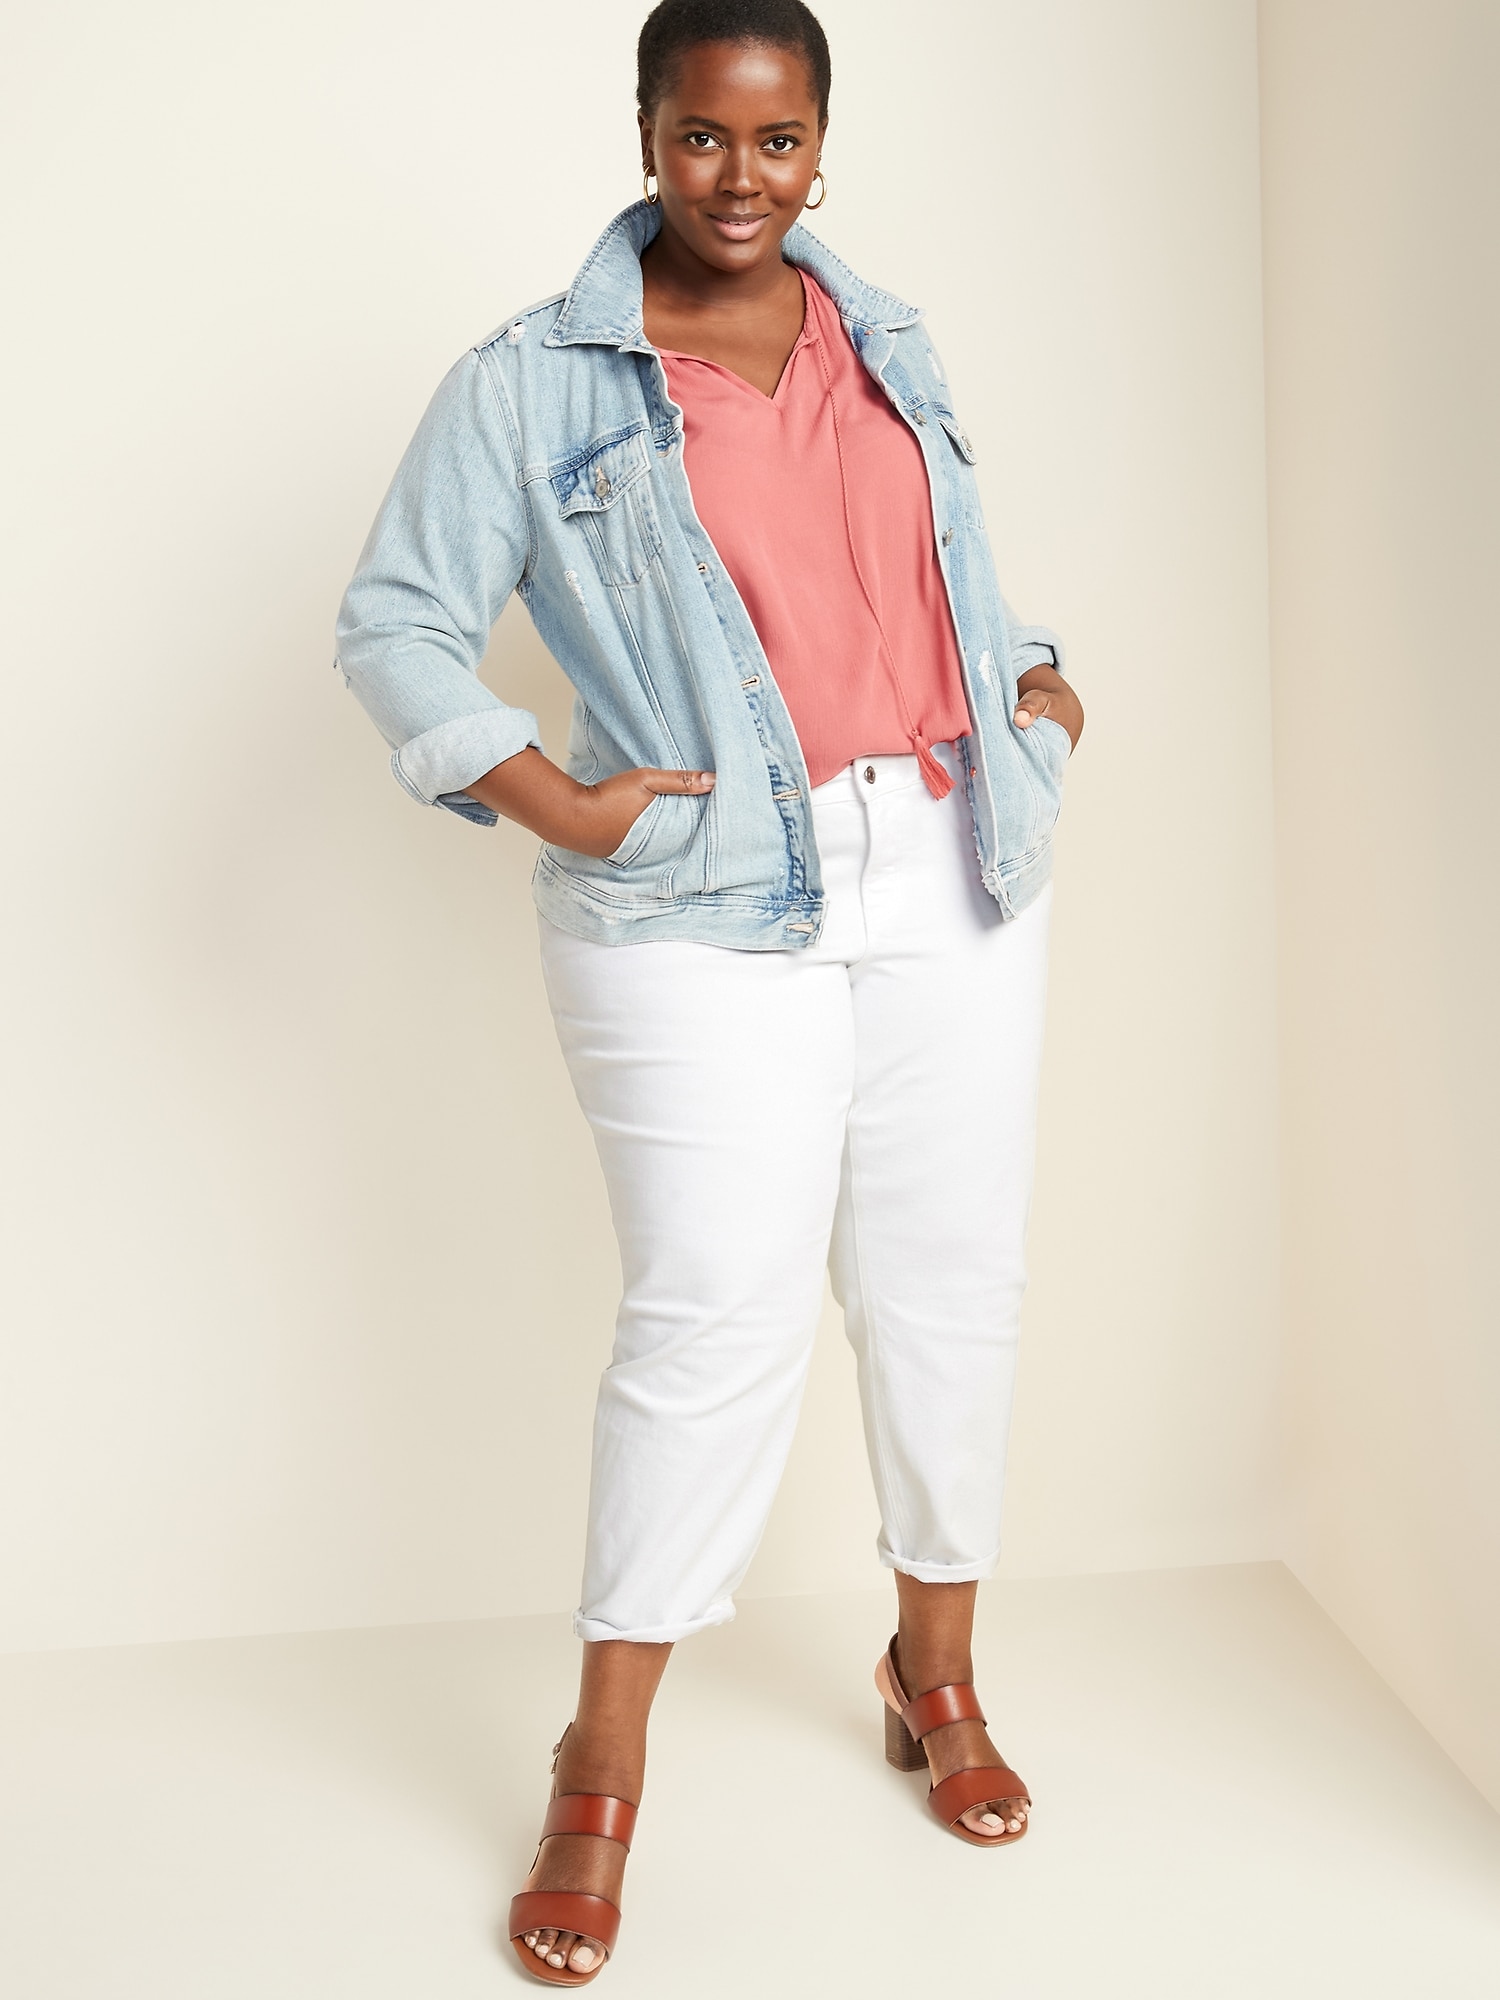 old navy plus size white jeans